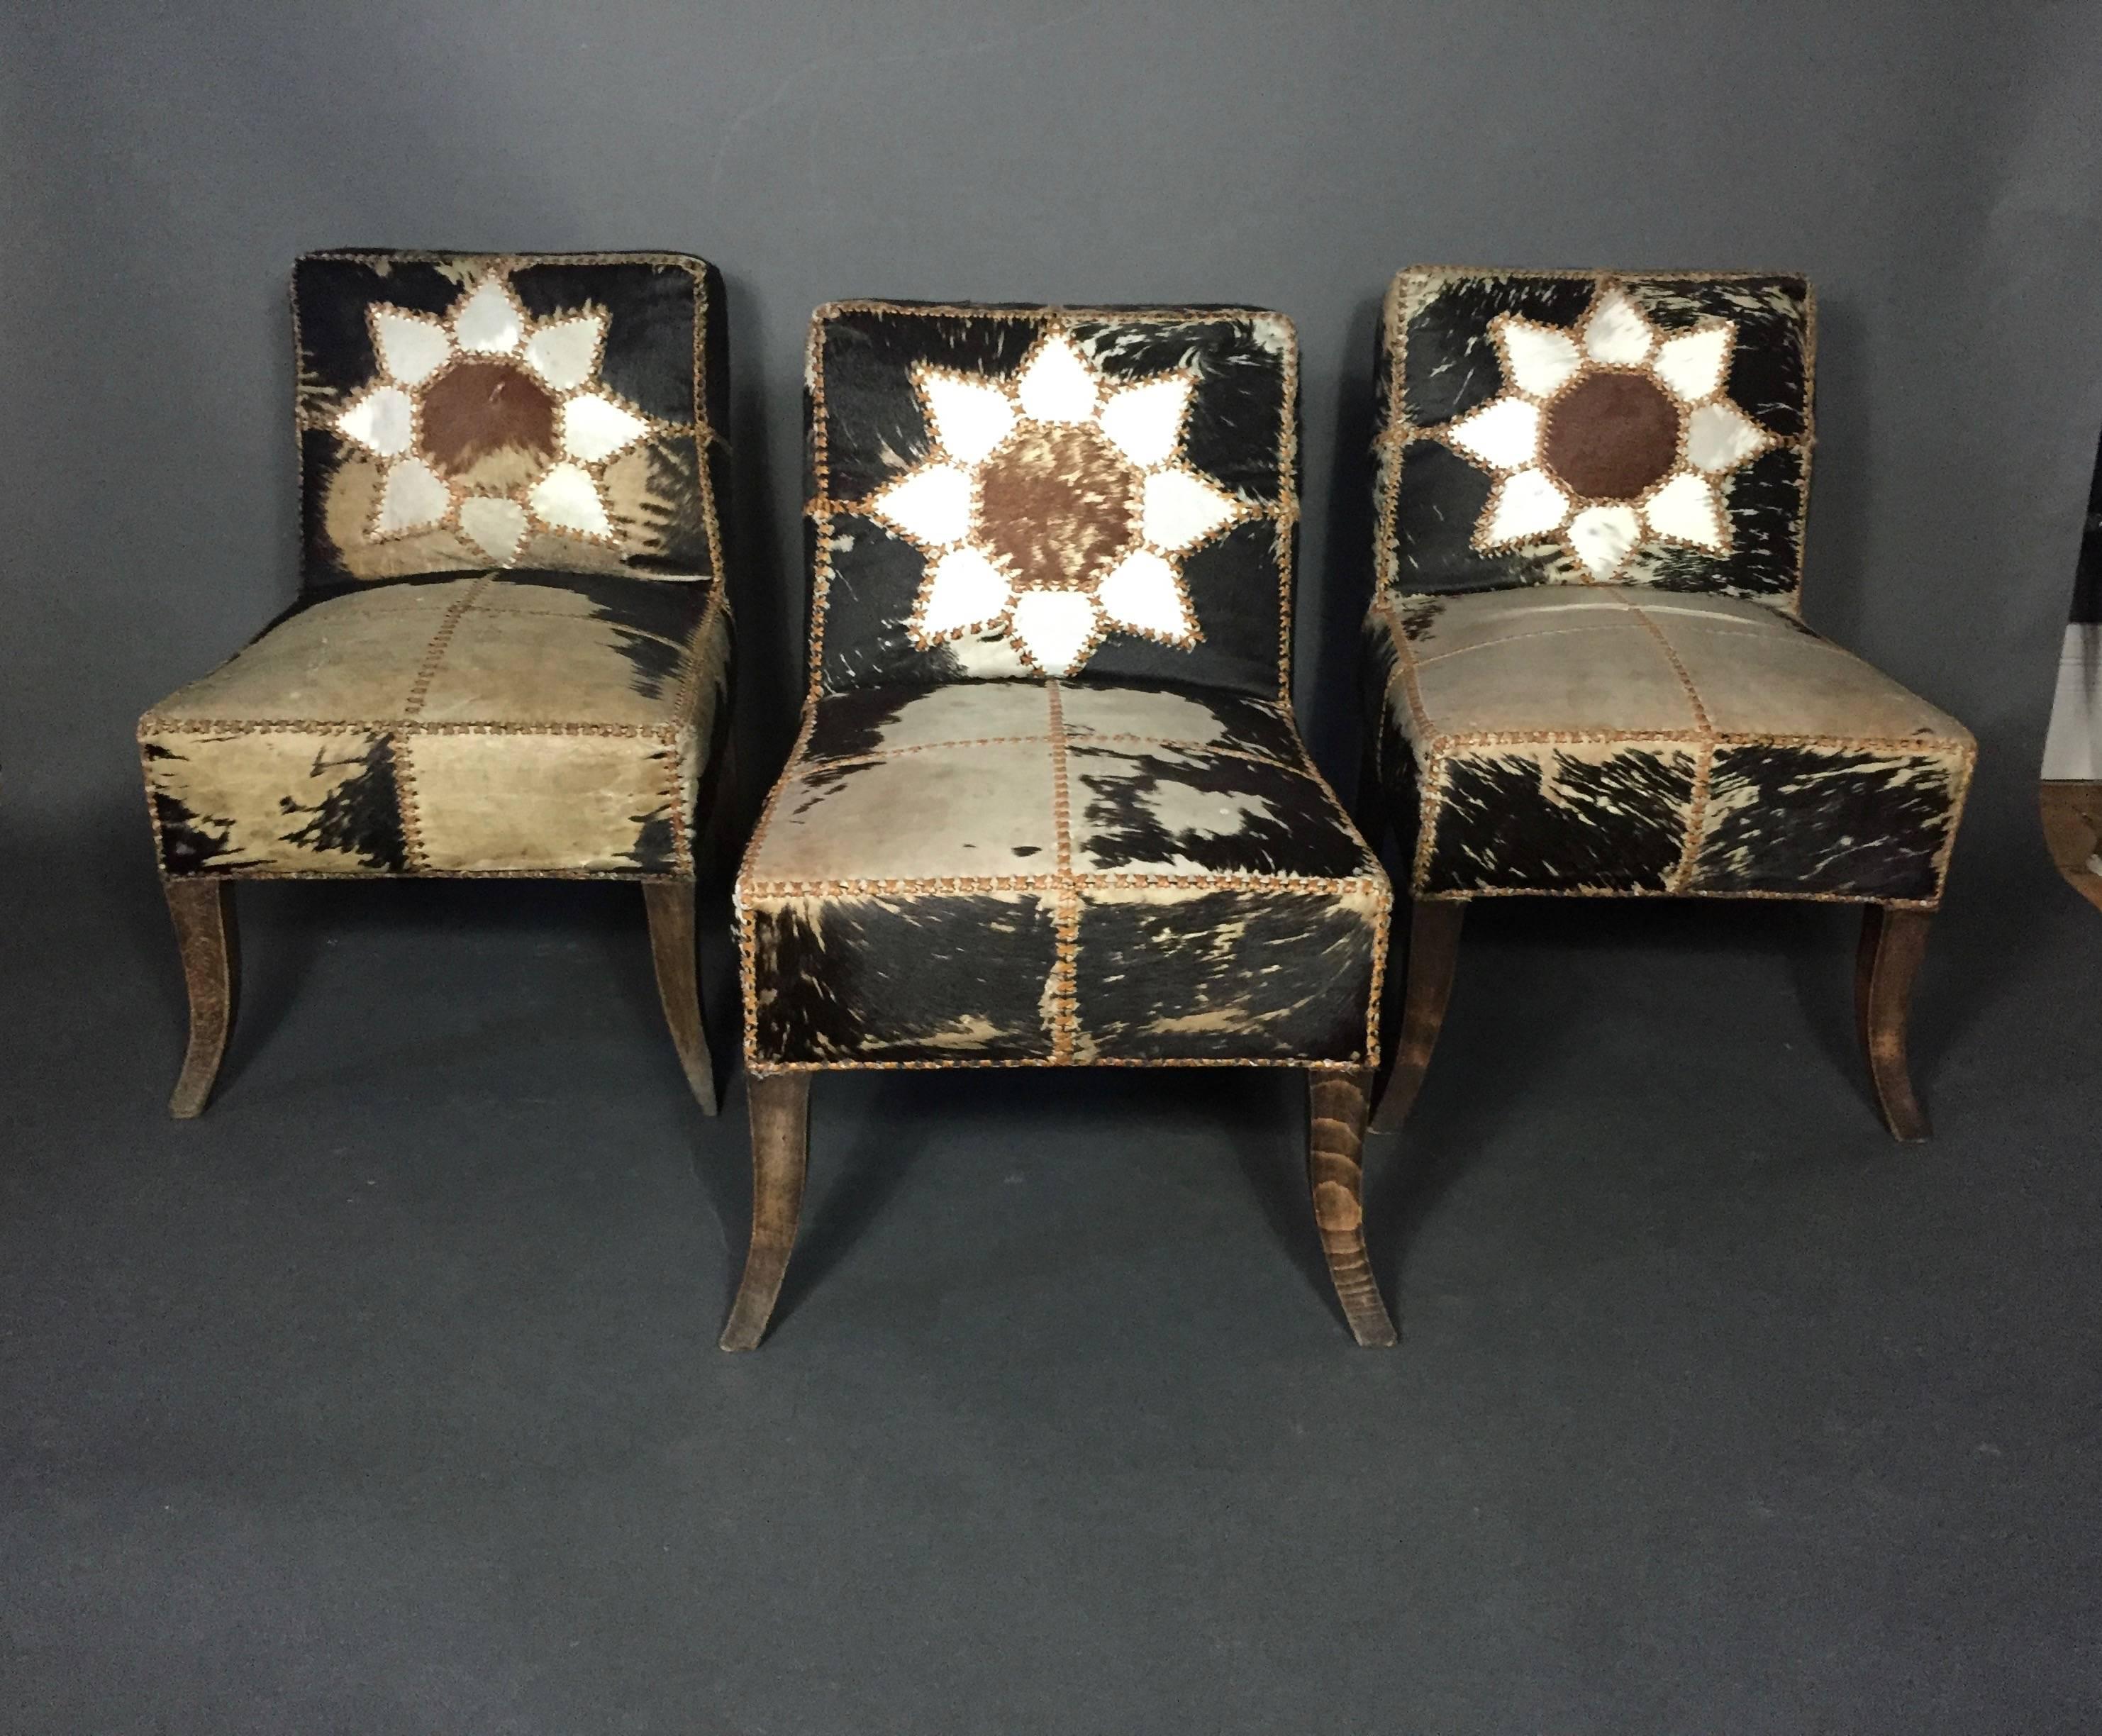 Nothing short of spectacular set of six dining chairs from the Art Deco period with eight-point floral patchwork design to front and back, leather strap binding and all original horse-hide covers. Metal Arab tag to each chair "Aliä